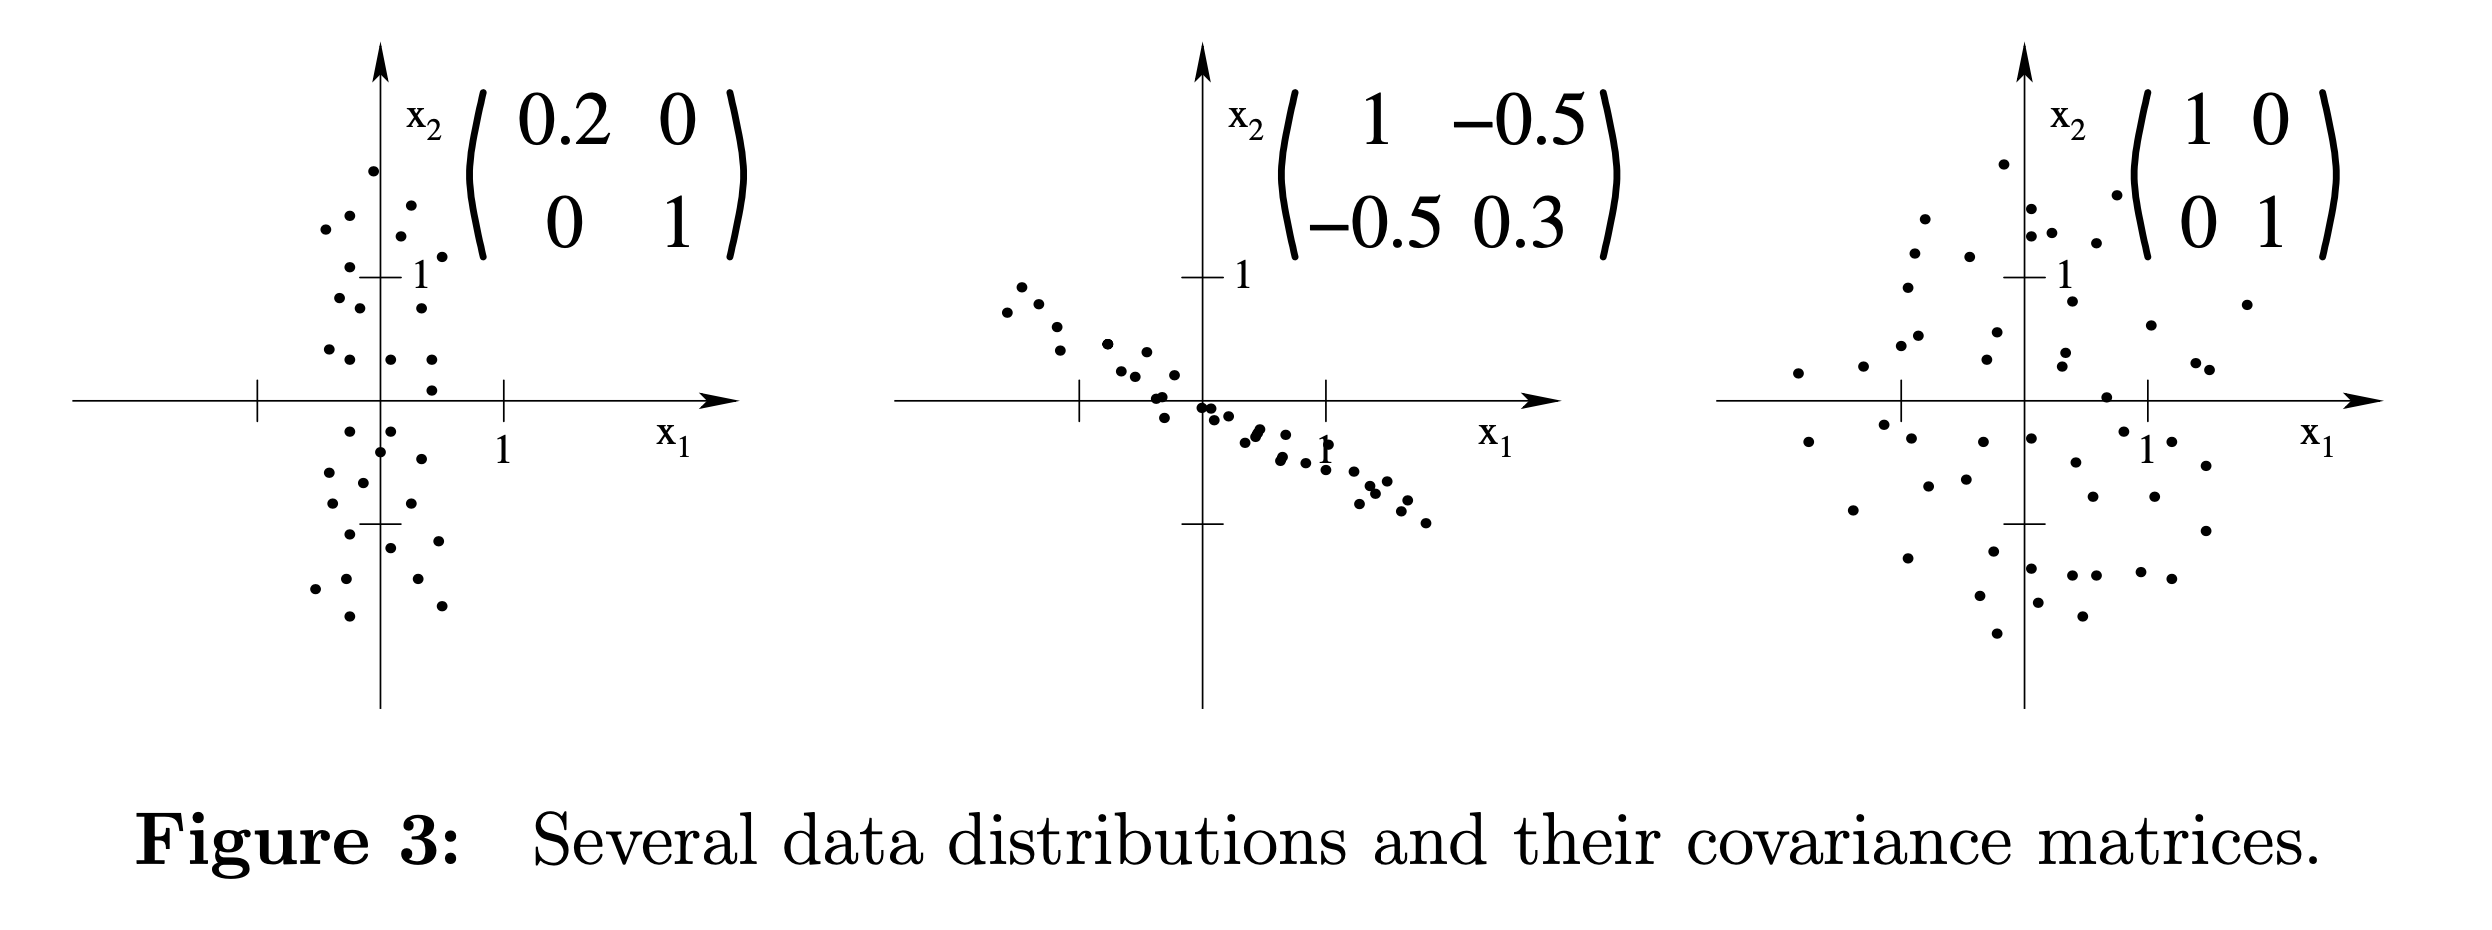 covariance_example